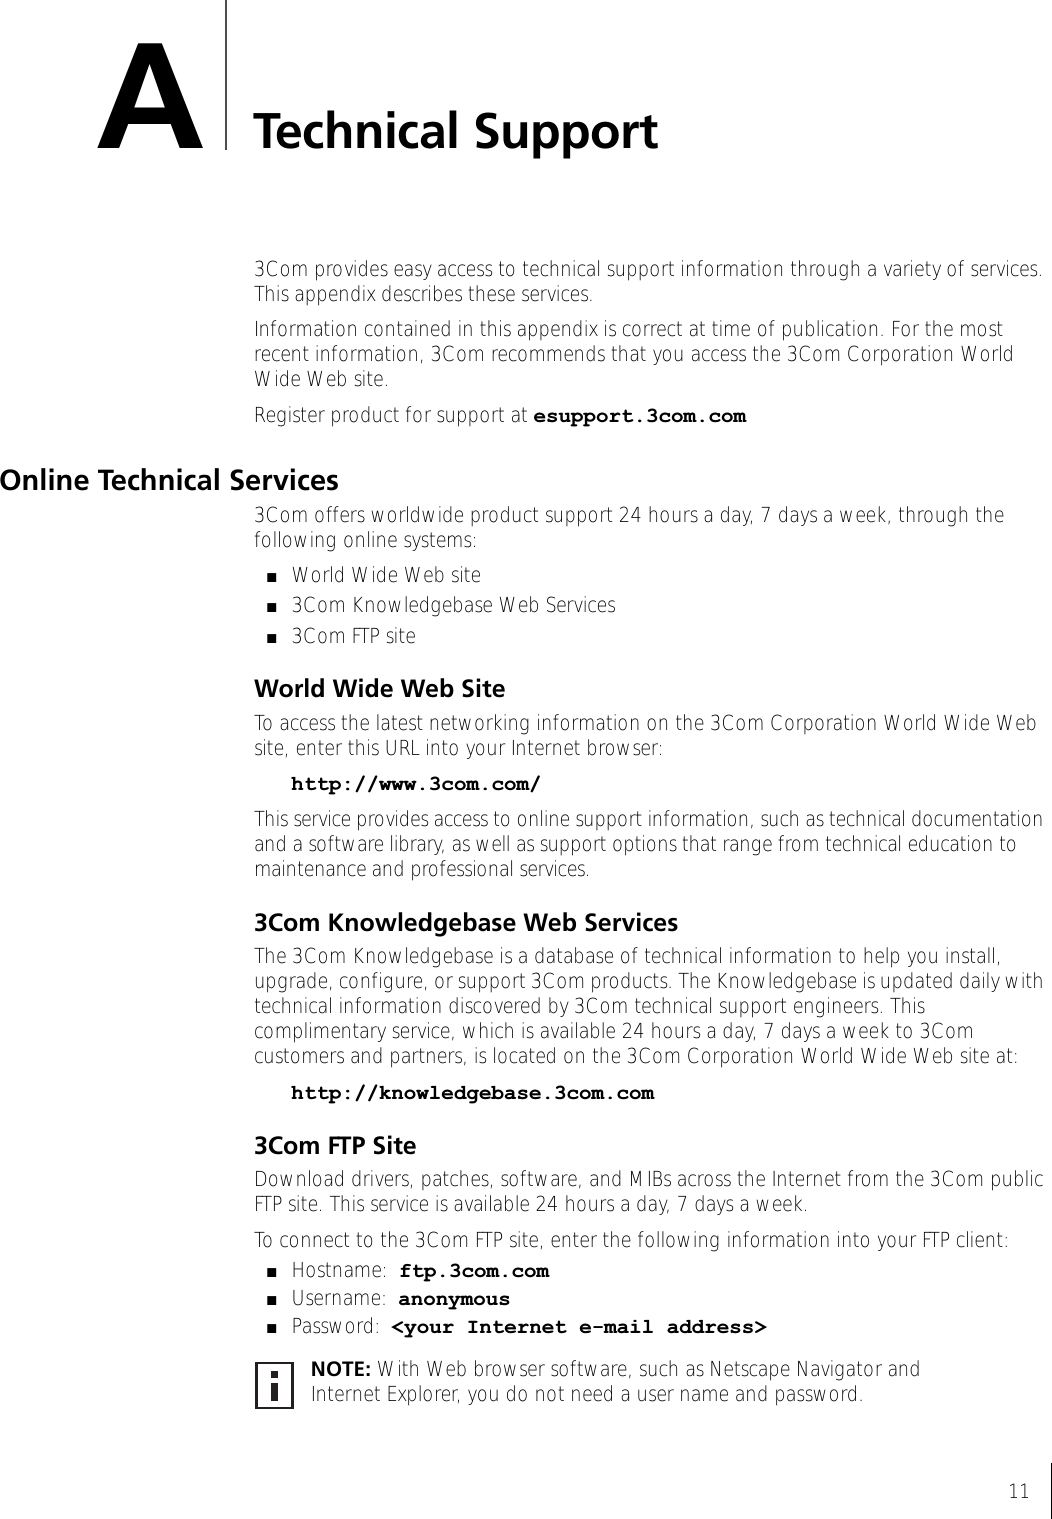 11ATechnical Support3Com provides easy access to technical support information through a variety of services. This appendix describes these services.Information contained in this appendix is correct at time of publication. For the most recent information, 3Com recommends that you access the 3Com Corporation World Wide Web site.Register product for support at esupport.3com.comOnline Technical Services3Com offers worldwide product support 24 hours a day, 7 days a week, through the following online systems:■World Wide Web site■3Com Knowledgebase Web Services■3Com FTP siteWorld Wide Web SiteTo access the latest networking information on the 3Com Corporation World Wide Web site, enter this URL into your Internet browser:http://www.3com.com/This service provides access to online support information, such as technical documentation and a software library, as well as support options that range from technical education to maintenance and professional services.3Com Knowledgebase Web ServicesThe 3Com Knowledgebase is a database of technical information to help you install, upgrade, configure, or support 3Com products. The Knowledgebase is updated daily with technical information discovered by 3Com technical support engineers. This complimentary service, which is available 24 hours a day, 7 days a week to 3Com customers and partners, is located on the 3Com Corporation World Wide Web site at:http://knowledgebase.3com.com3Com FTP SiteDownload drivers, patches, software, and MIBs across the Internet from the 3Com public FTP site. This service is available 24 hours a day, 7 days a week.To connect to the 3Com FTP site, enter the following information into your FTP client:■Hostname: ftp.3com.com■Username: anonymous■Password: &lt;your Internet e-mail address&gt;NOTE: With Web browser software, such as Netscape Navigator and Internet Explorer, you do not need a user name and password.